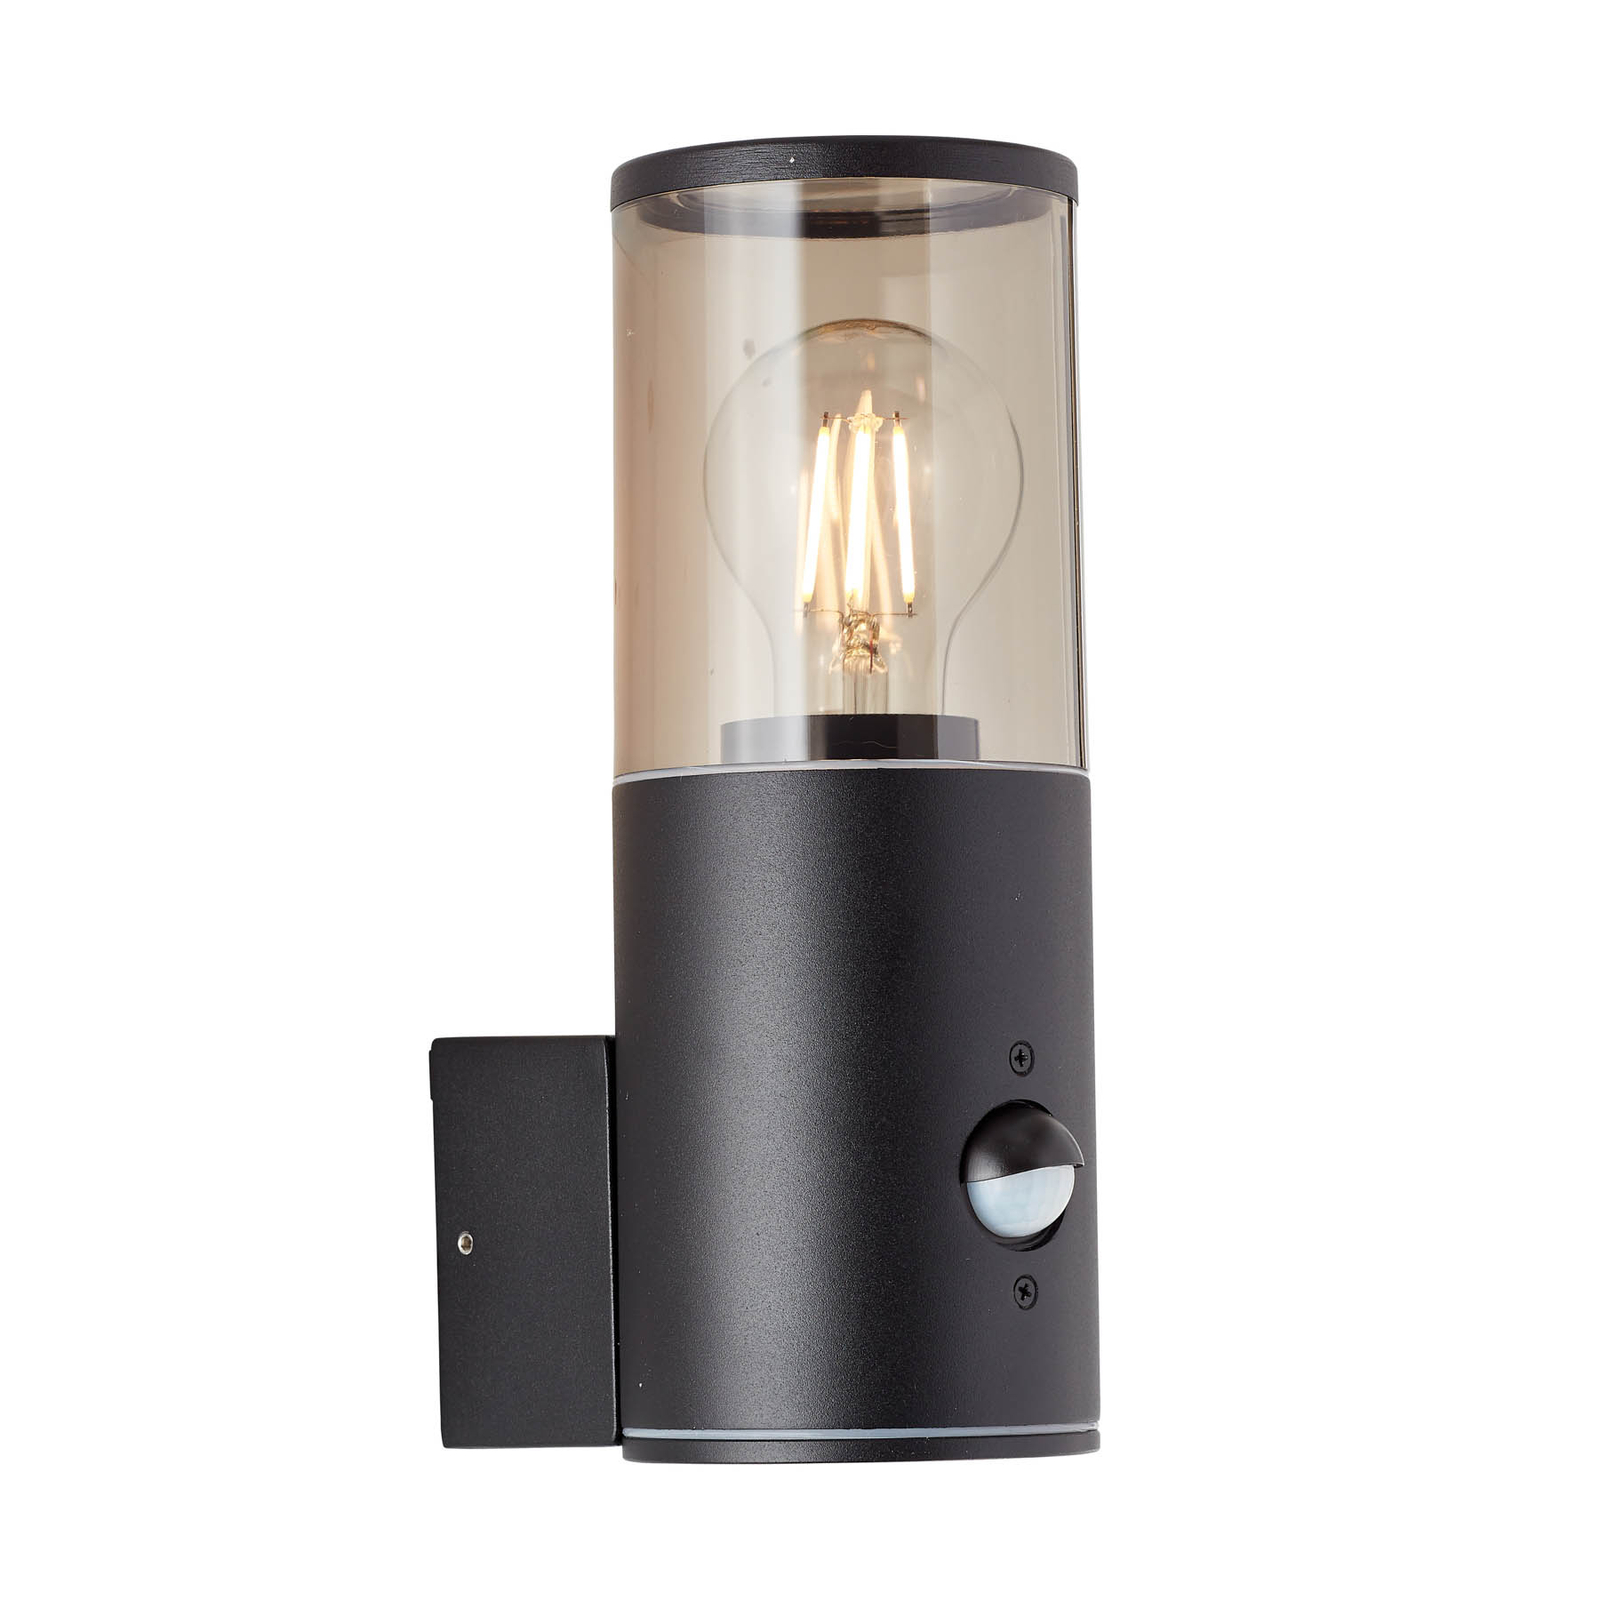 Sergioro outdoor wall light one-bulb with a sensor